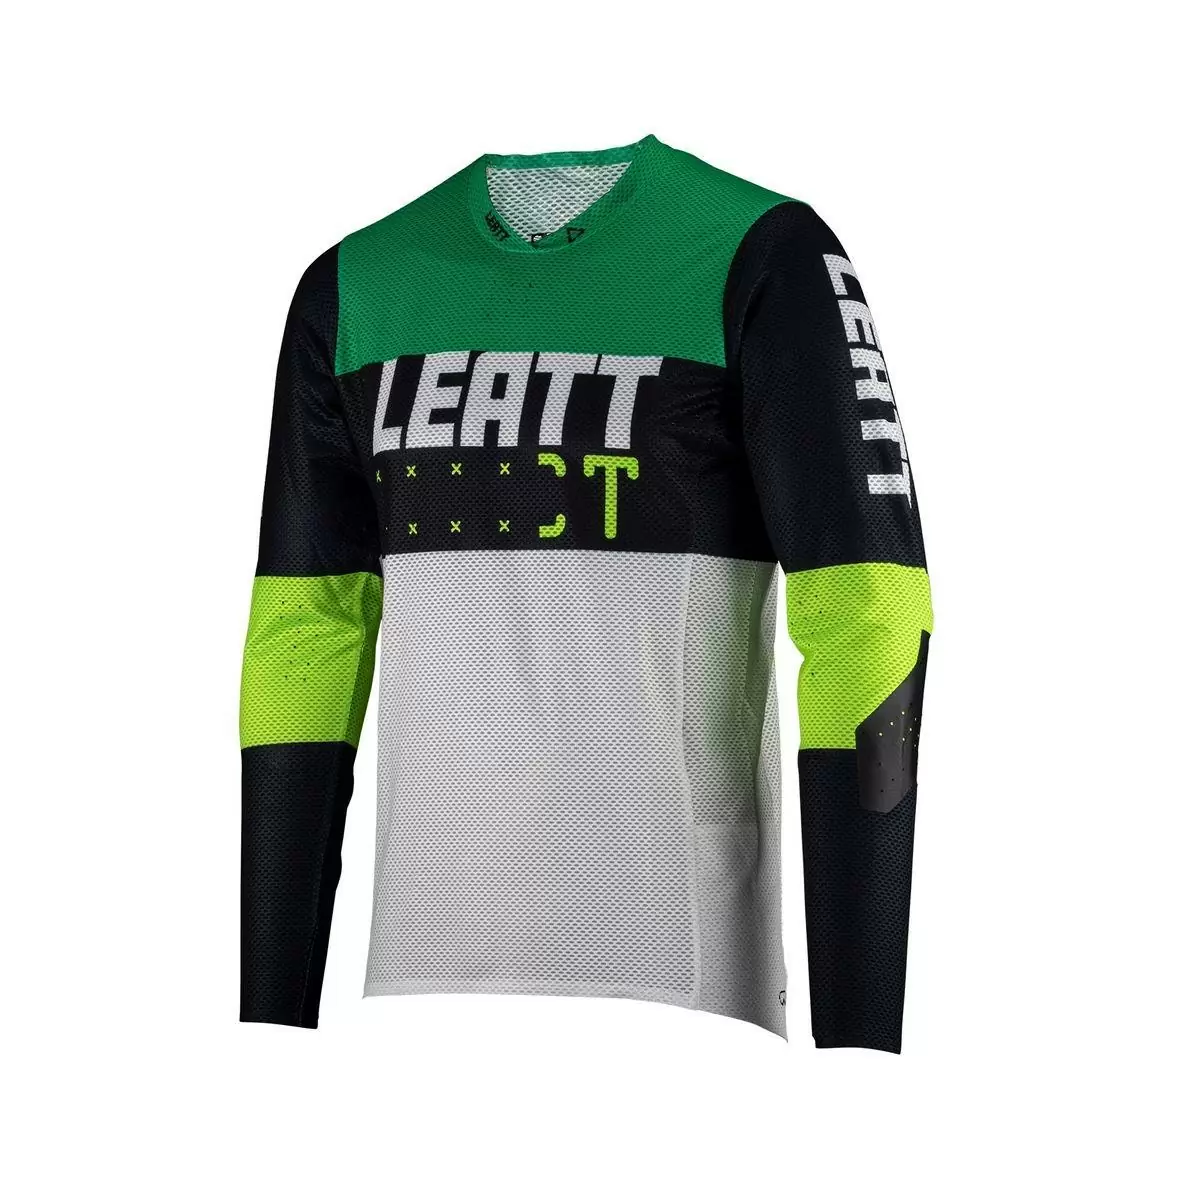 Gravity 4.0 Long Sleeves MTB Jersey Green/Black Size S - image